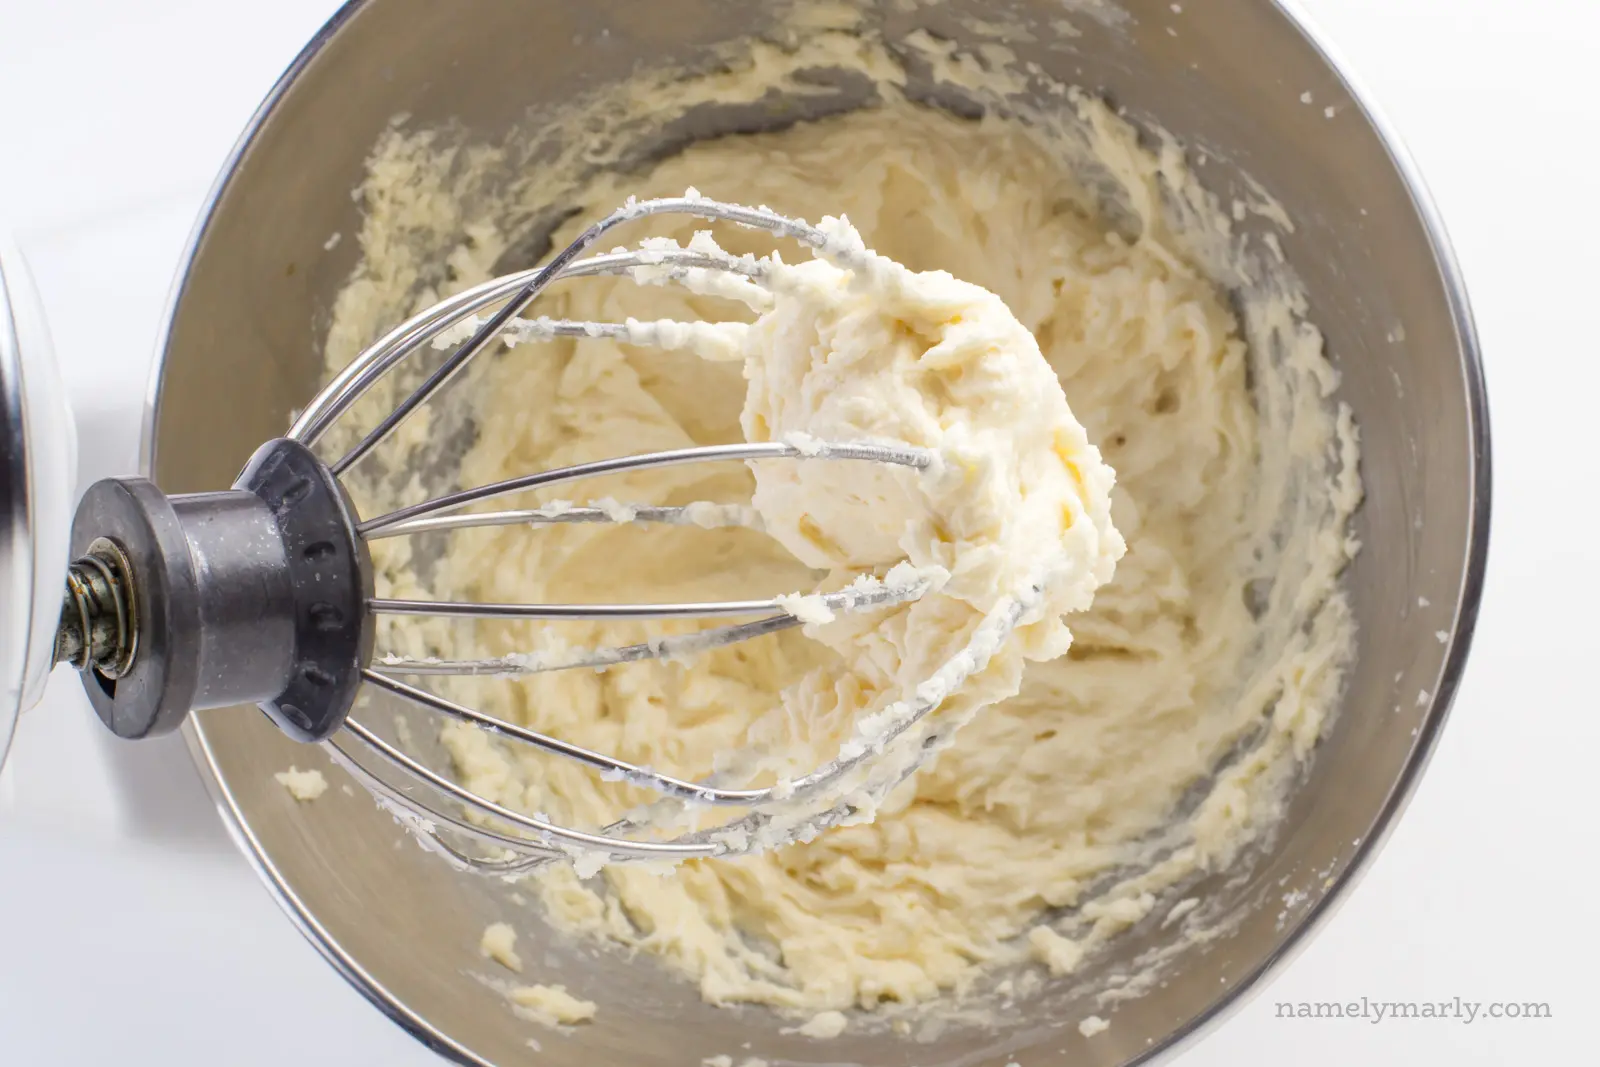 A stand mixer has been used to make cookie dough. The cookie dough is in the stand mixer bowl, and the mixer attachment is full of cookie dough too.